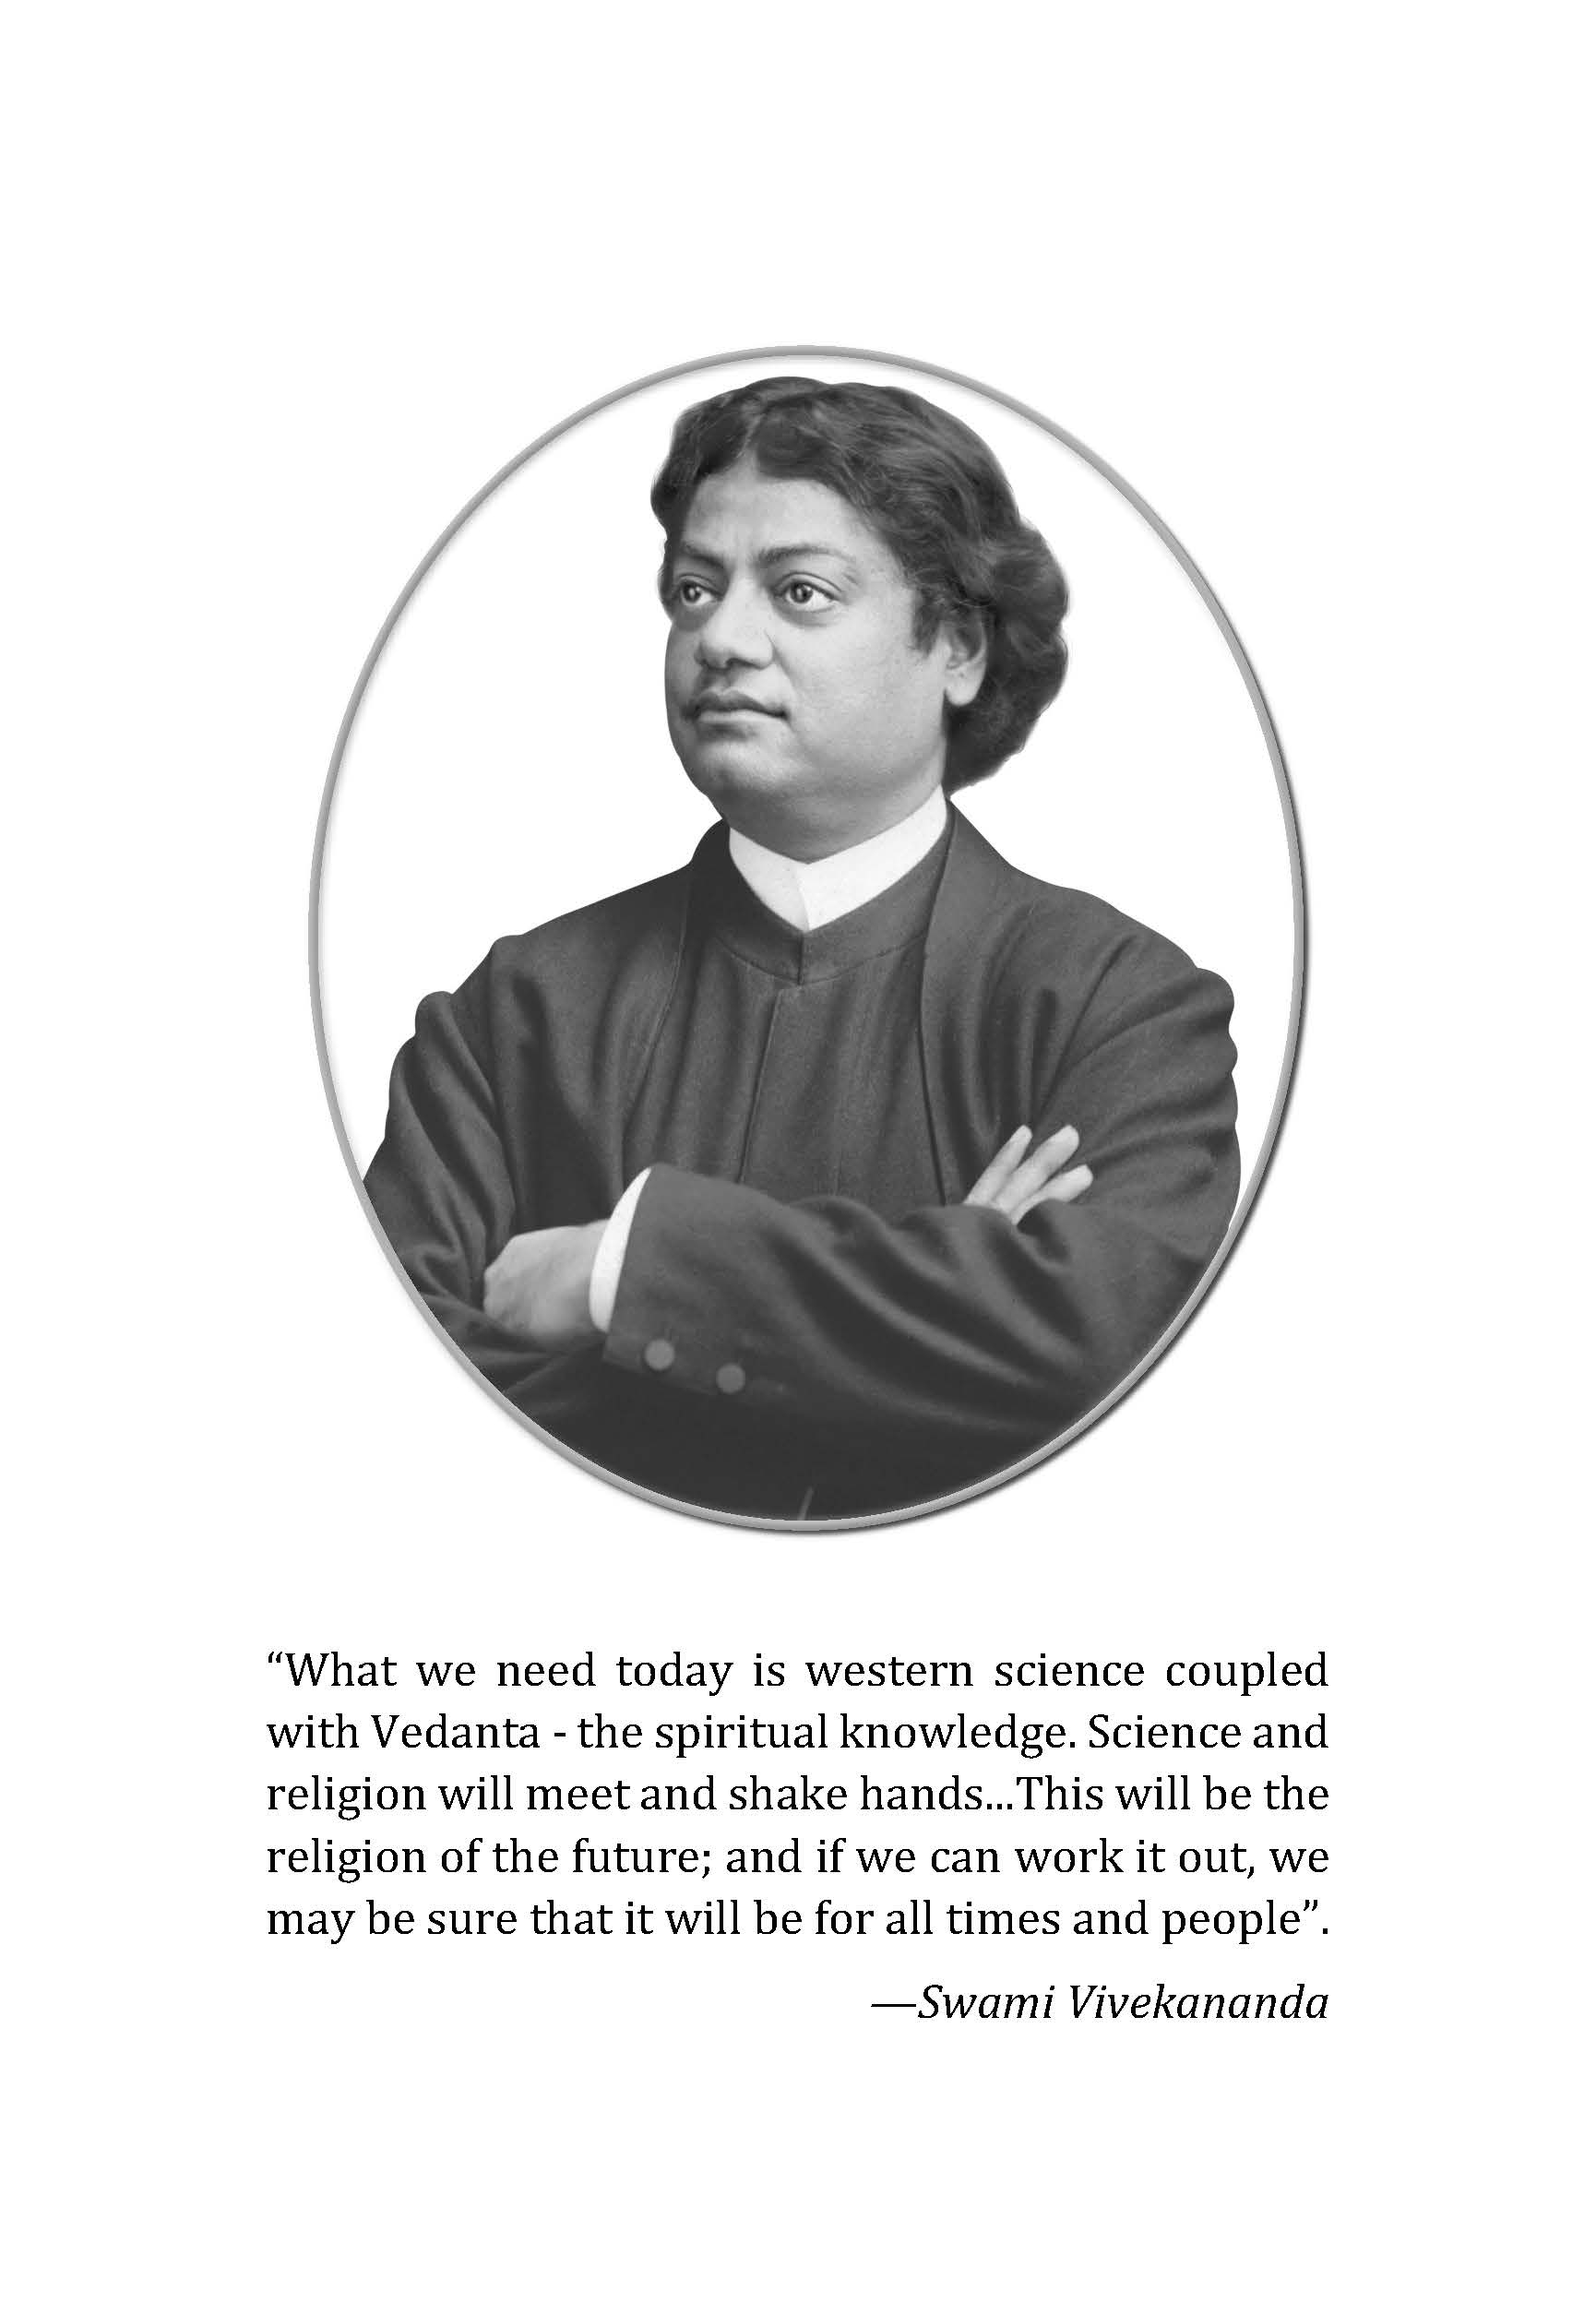 Swami Vivekananda - Modern Science and Human Excellence